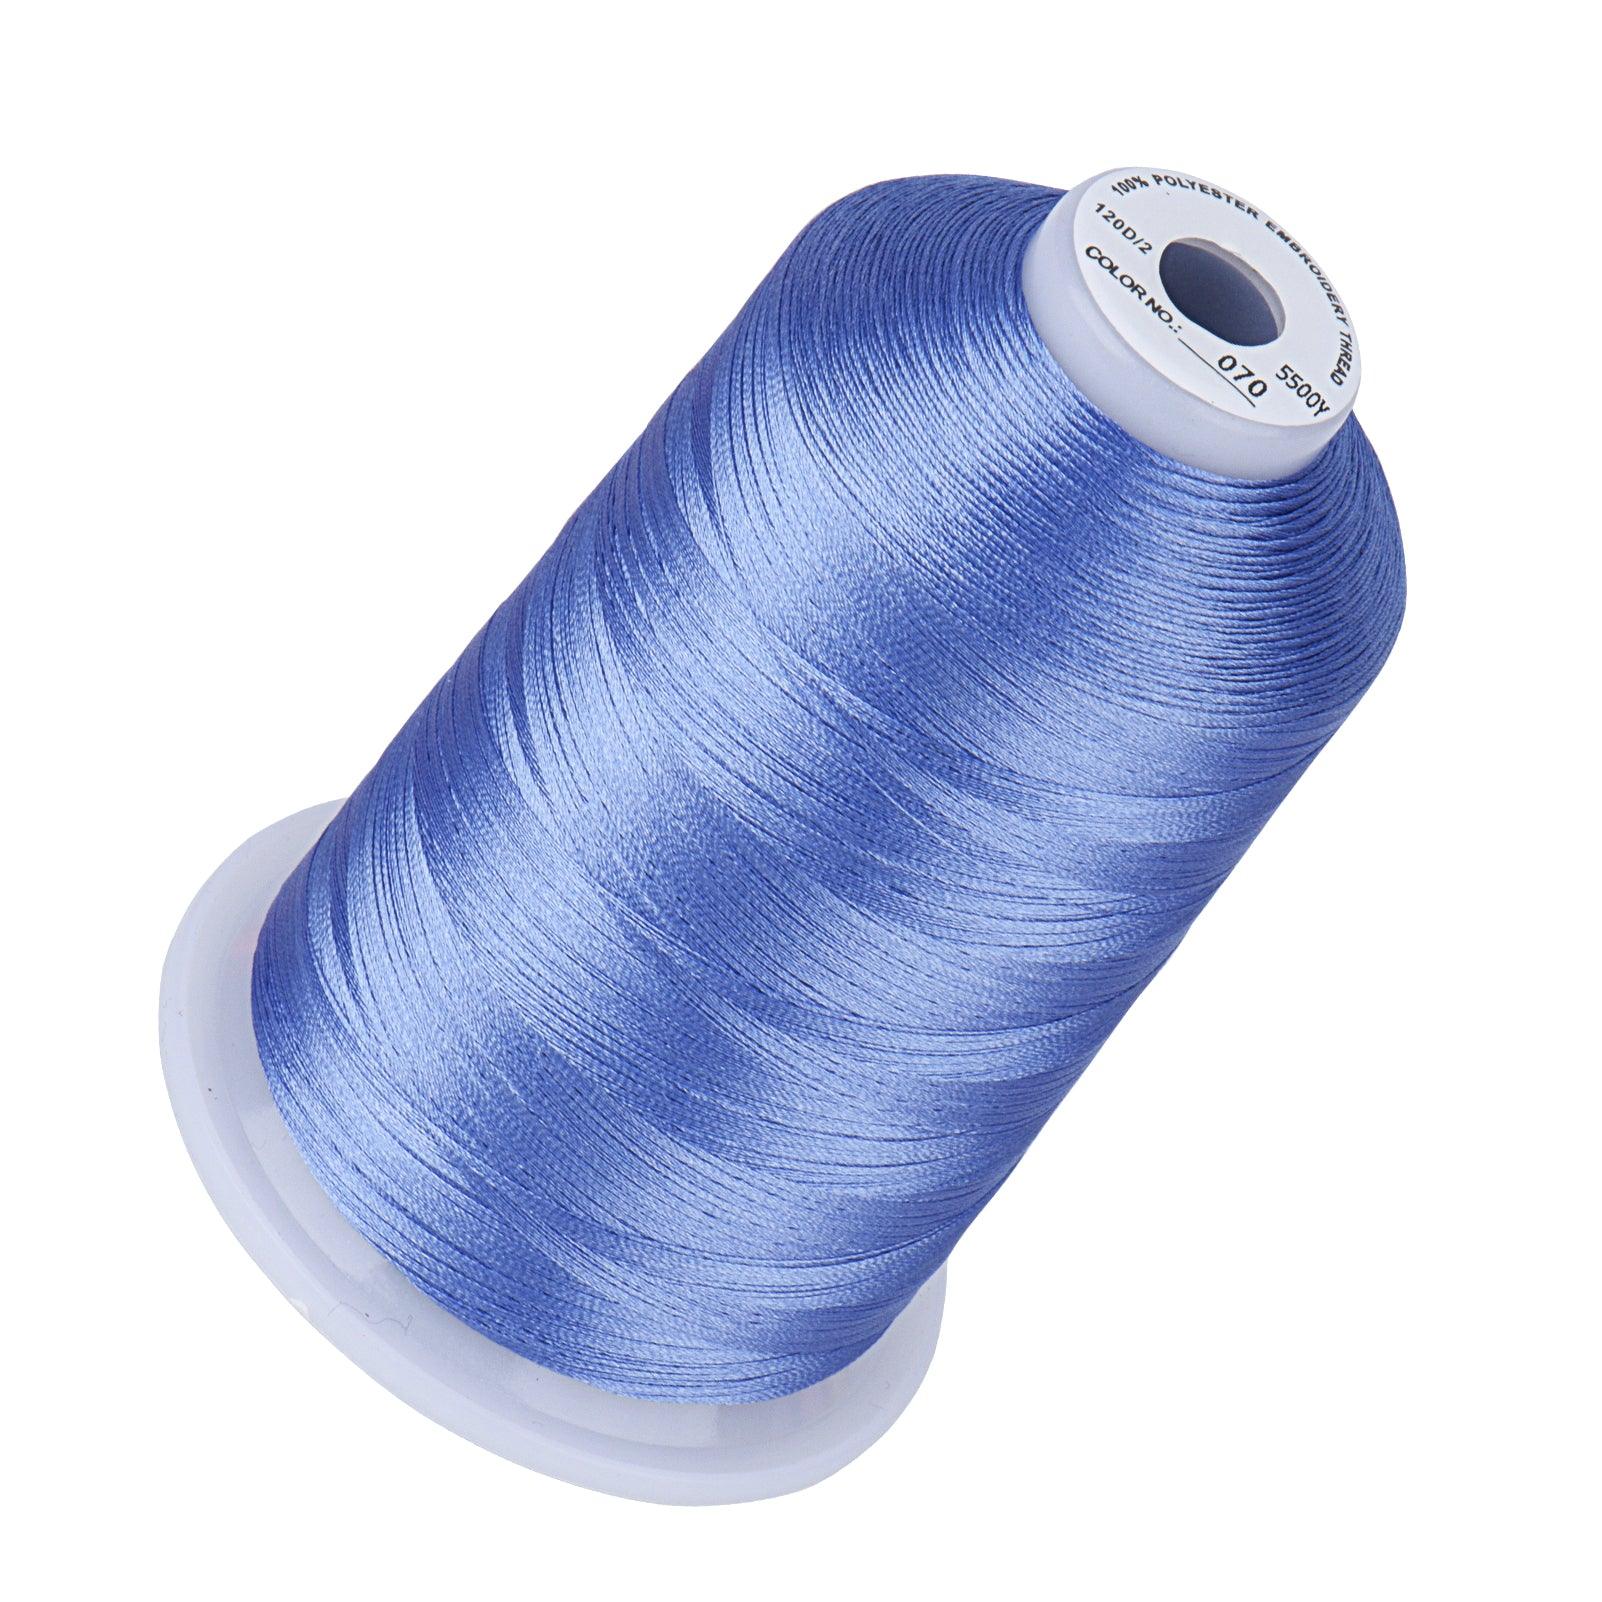 Simthread Sewing Thread in Notions & Sewing Accessories 